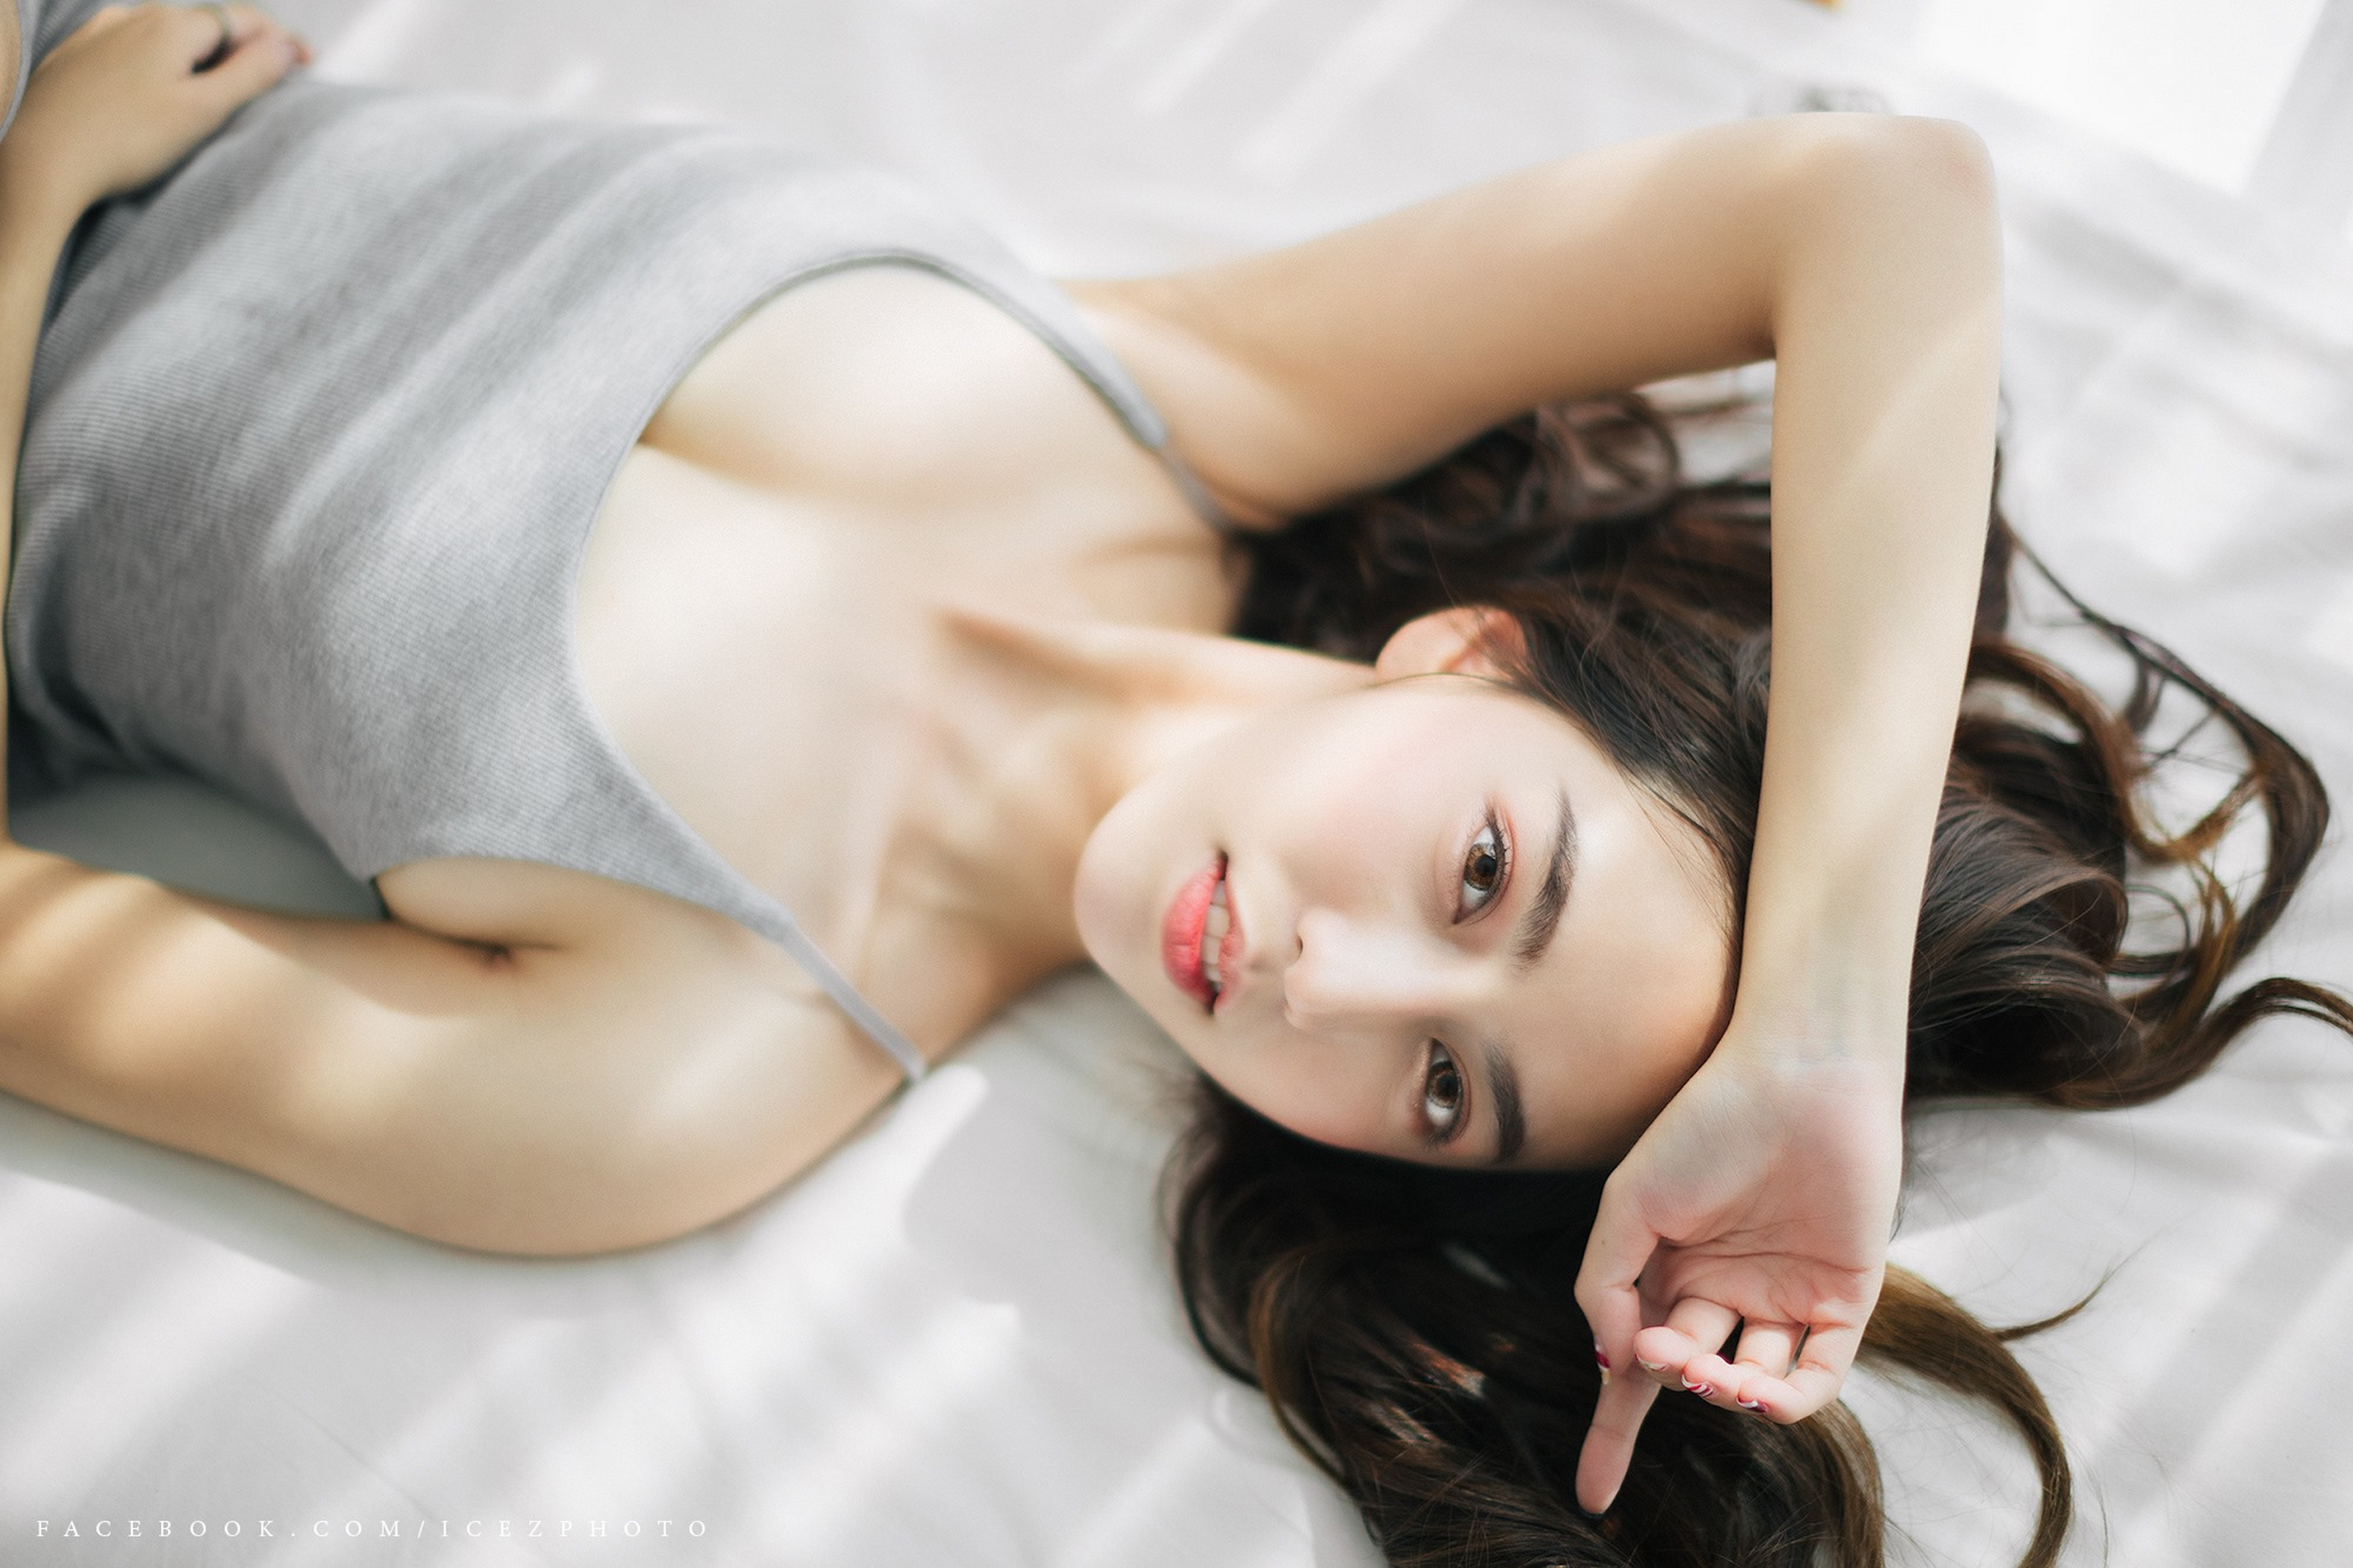 Asian Model Hands On Head Red Lipstick Lying Down 3200x2133